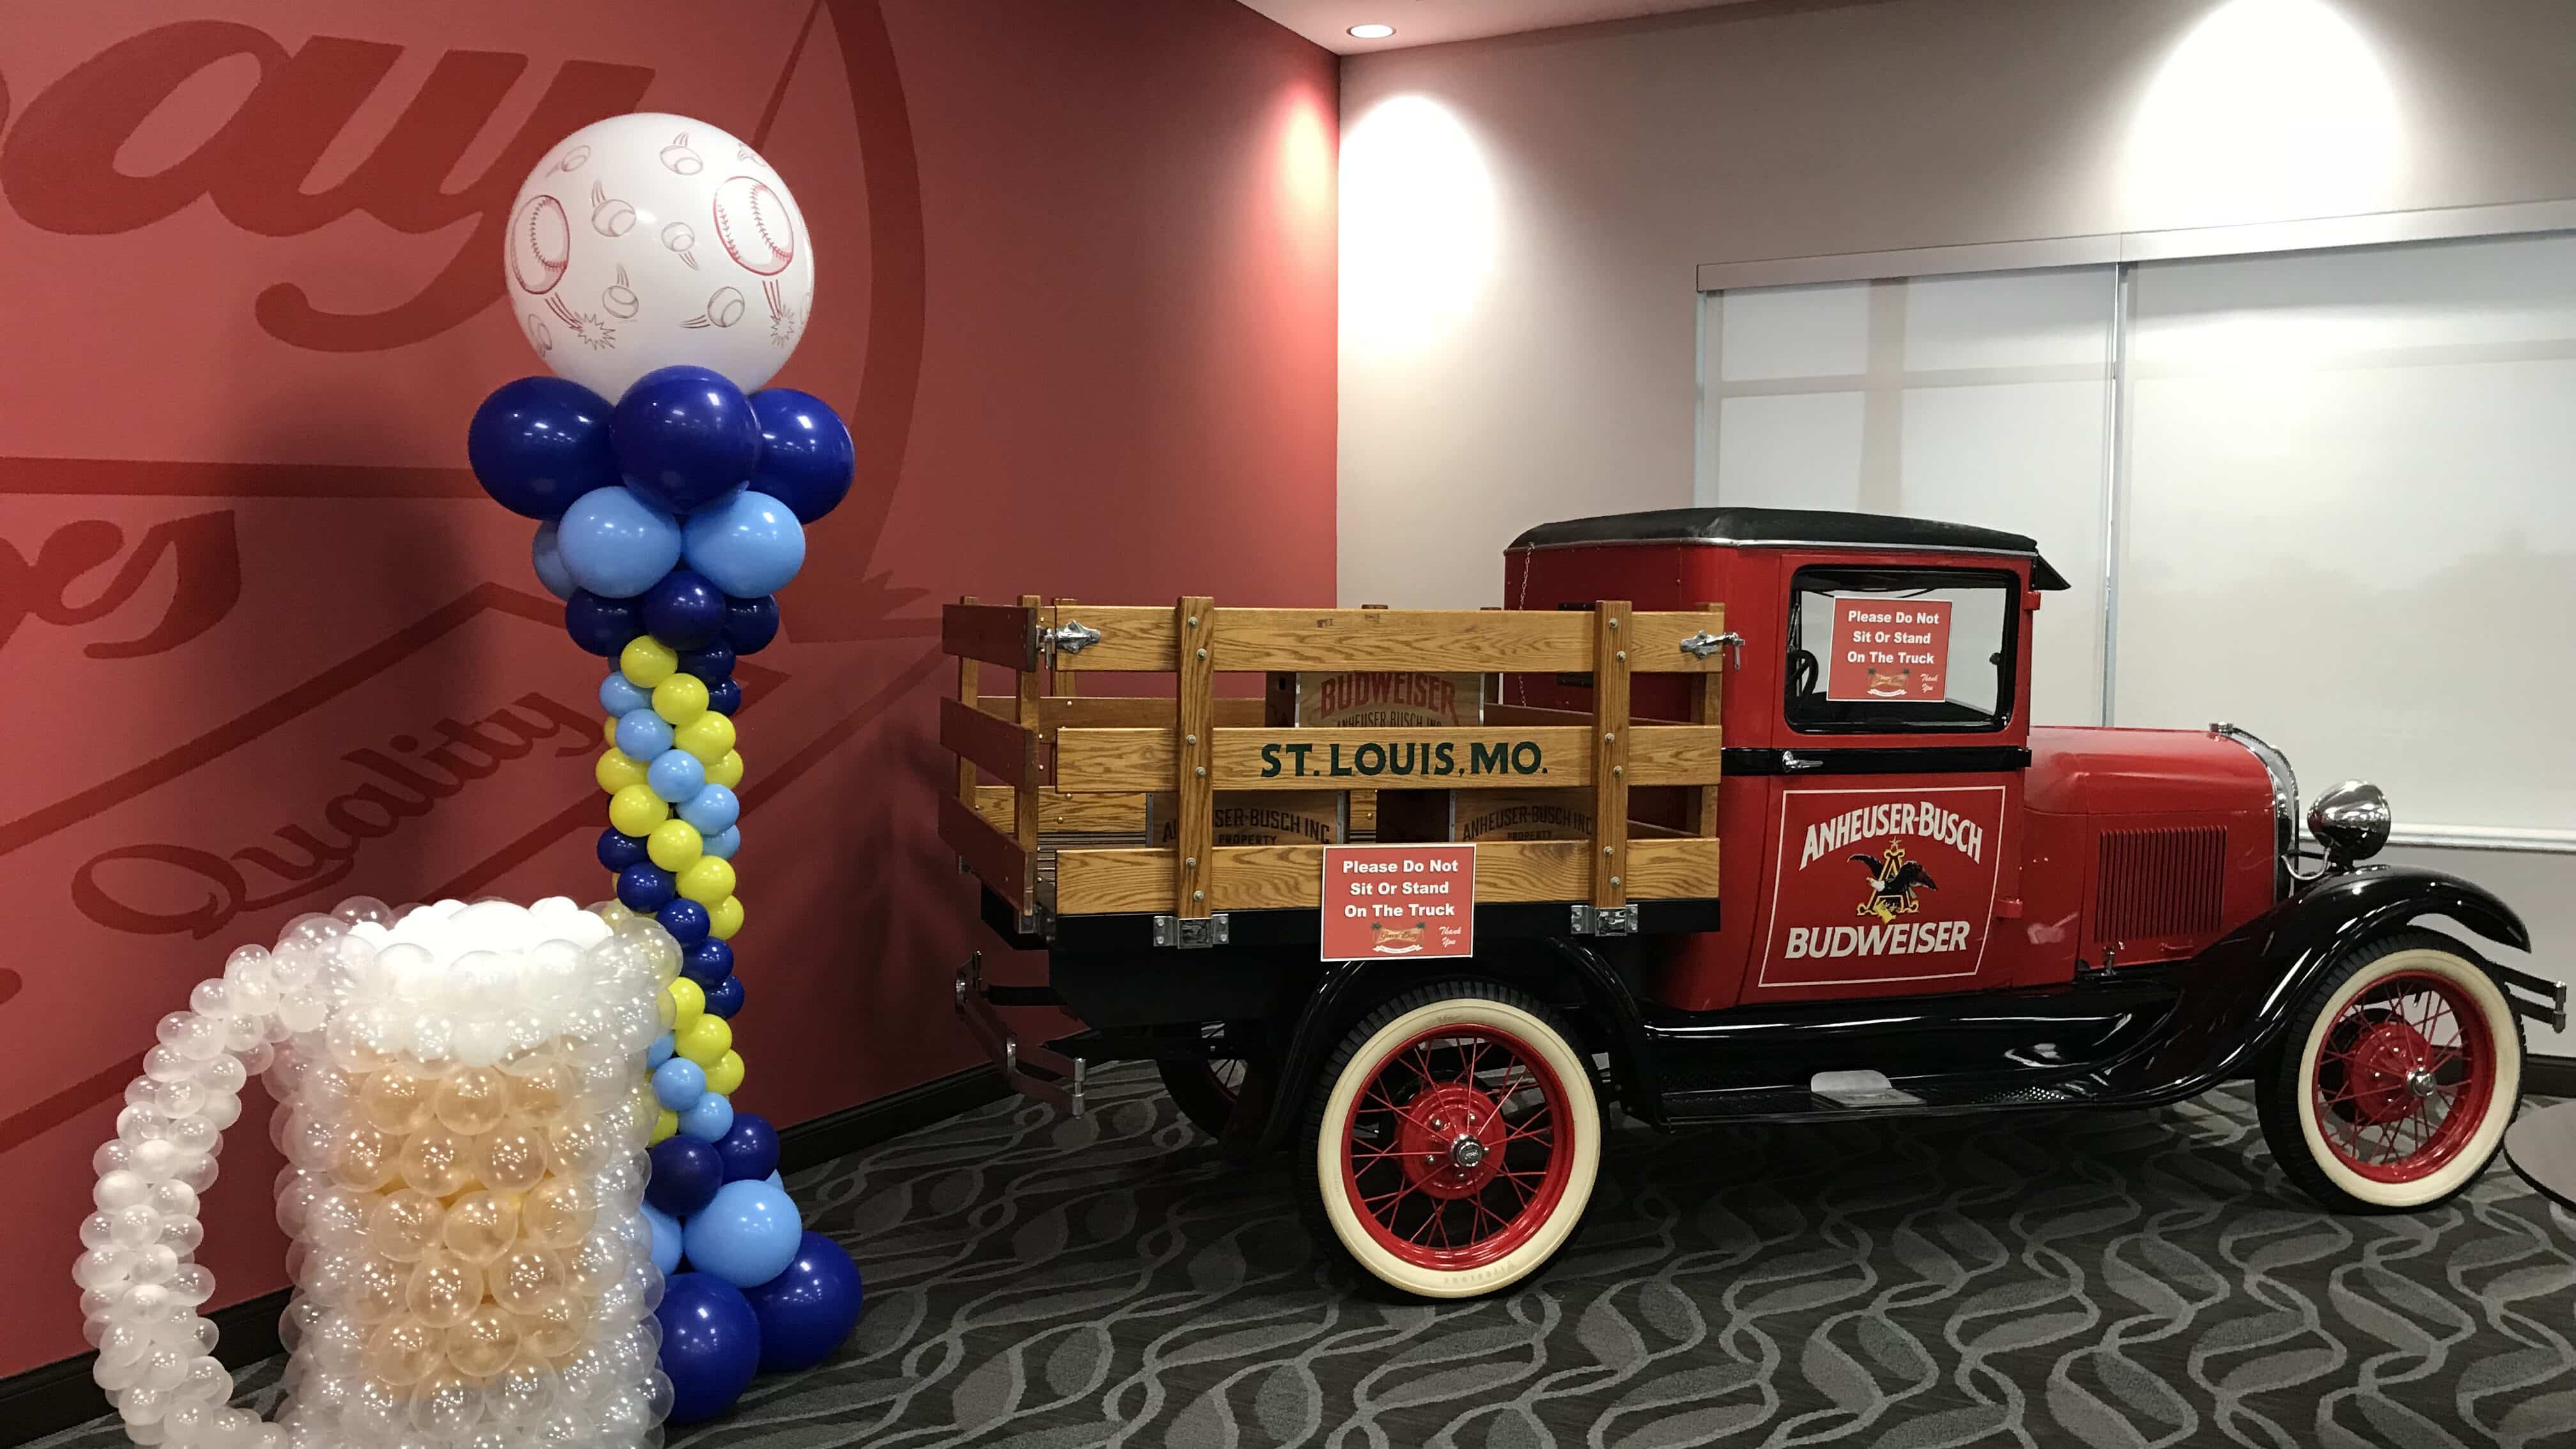 Tampa Budweiser corporate event with beer mug sculpture and balloon column and truck Tampa